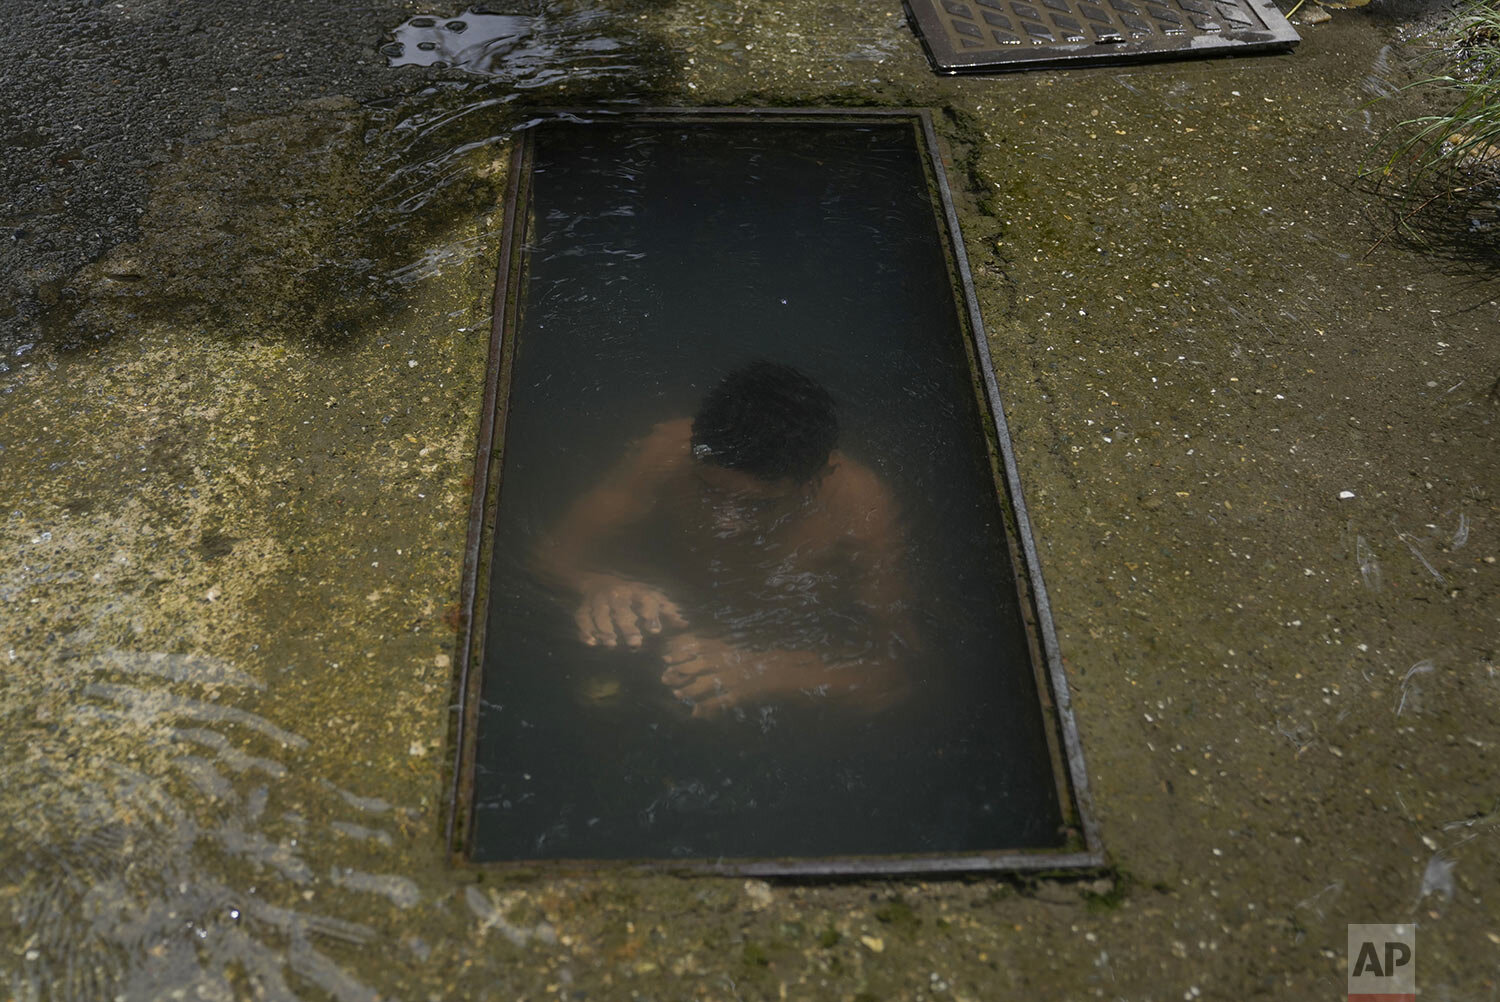  A boy submerges himself to cool down at the site of a broken water main at a street in Caracas, Venezuela, Tuesday, July 27, 2021, amid the new coronavirus pandemic. (AP Photo/Ariana Cubillos) 